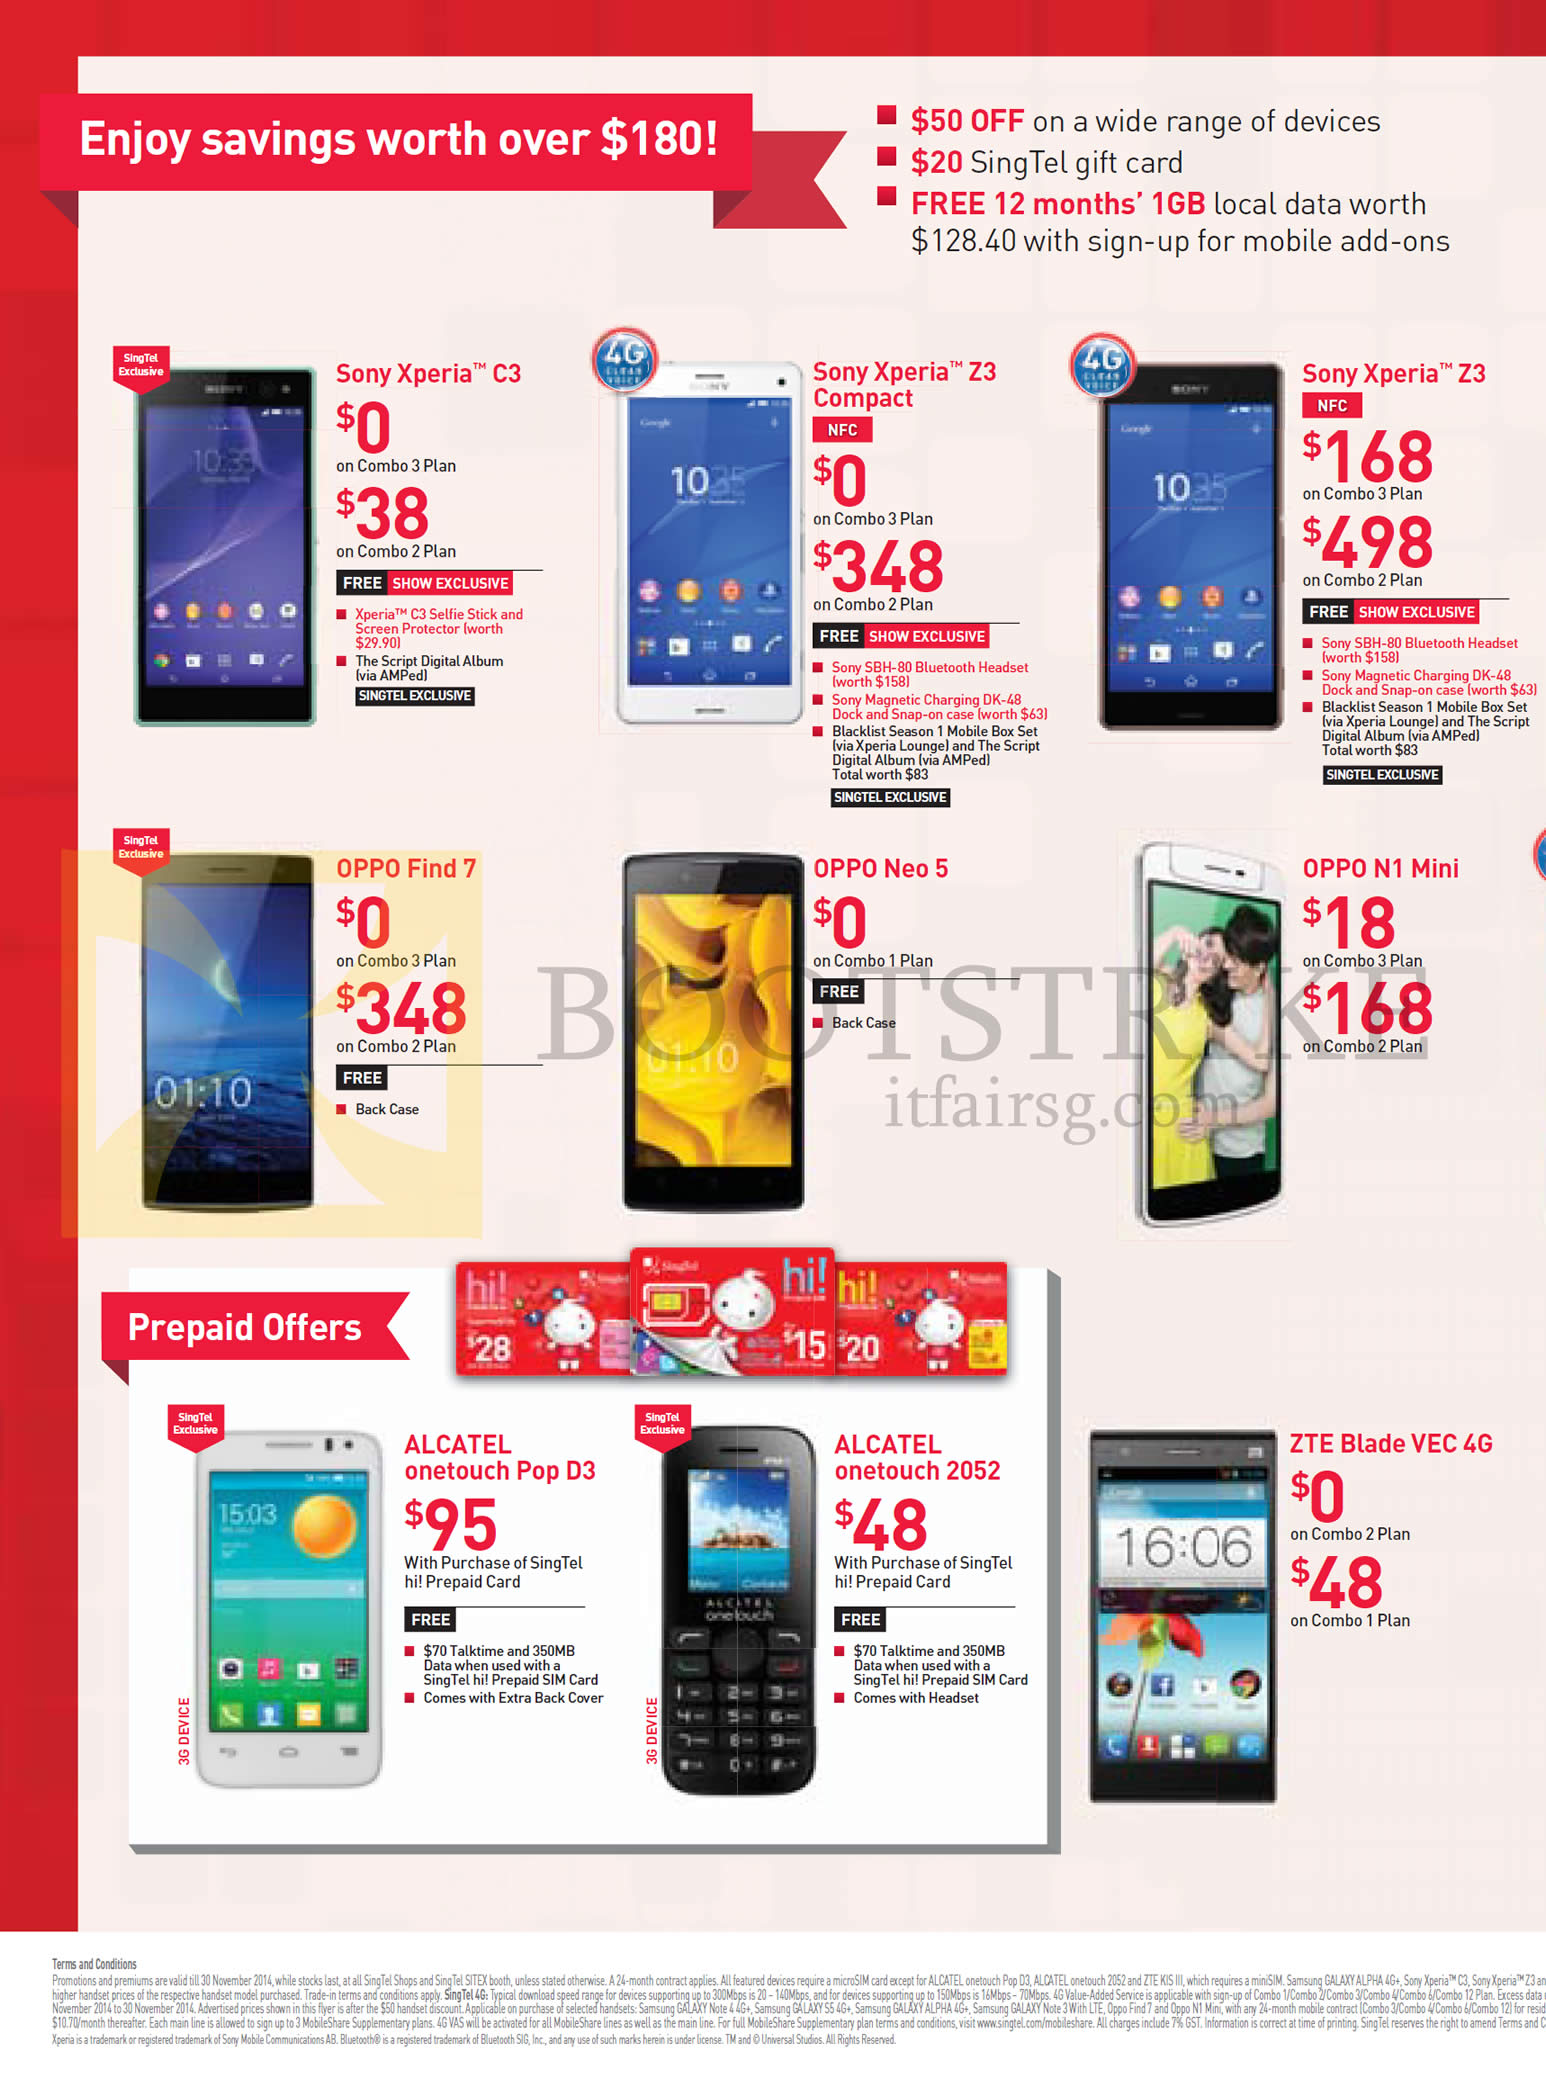 SITEX 2014 price list image brochure of Singtel Mobile Sony Xperia C3, Z3, Z3 Compact, Oppo Find 7, Neo 5, N1 Mini, ZTE Blade VEC, Alcatel Onetouch Pop D3, 2052